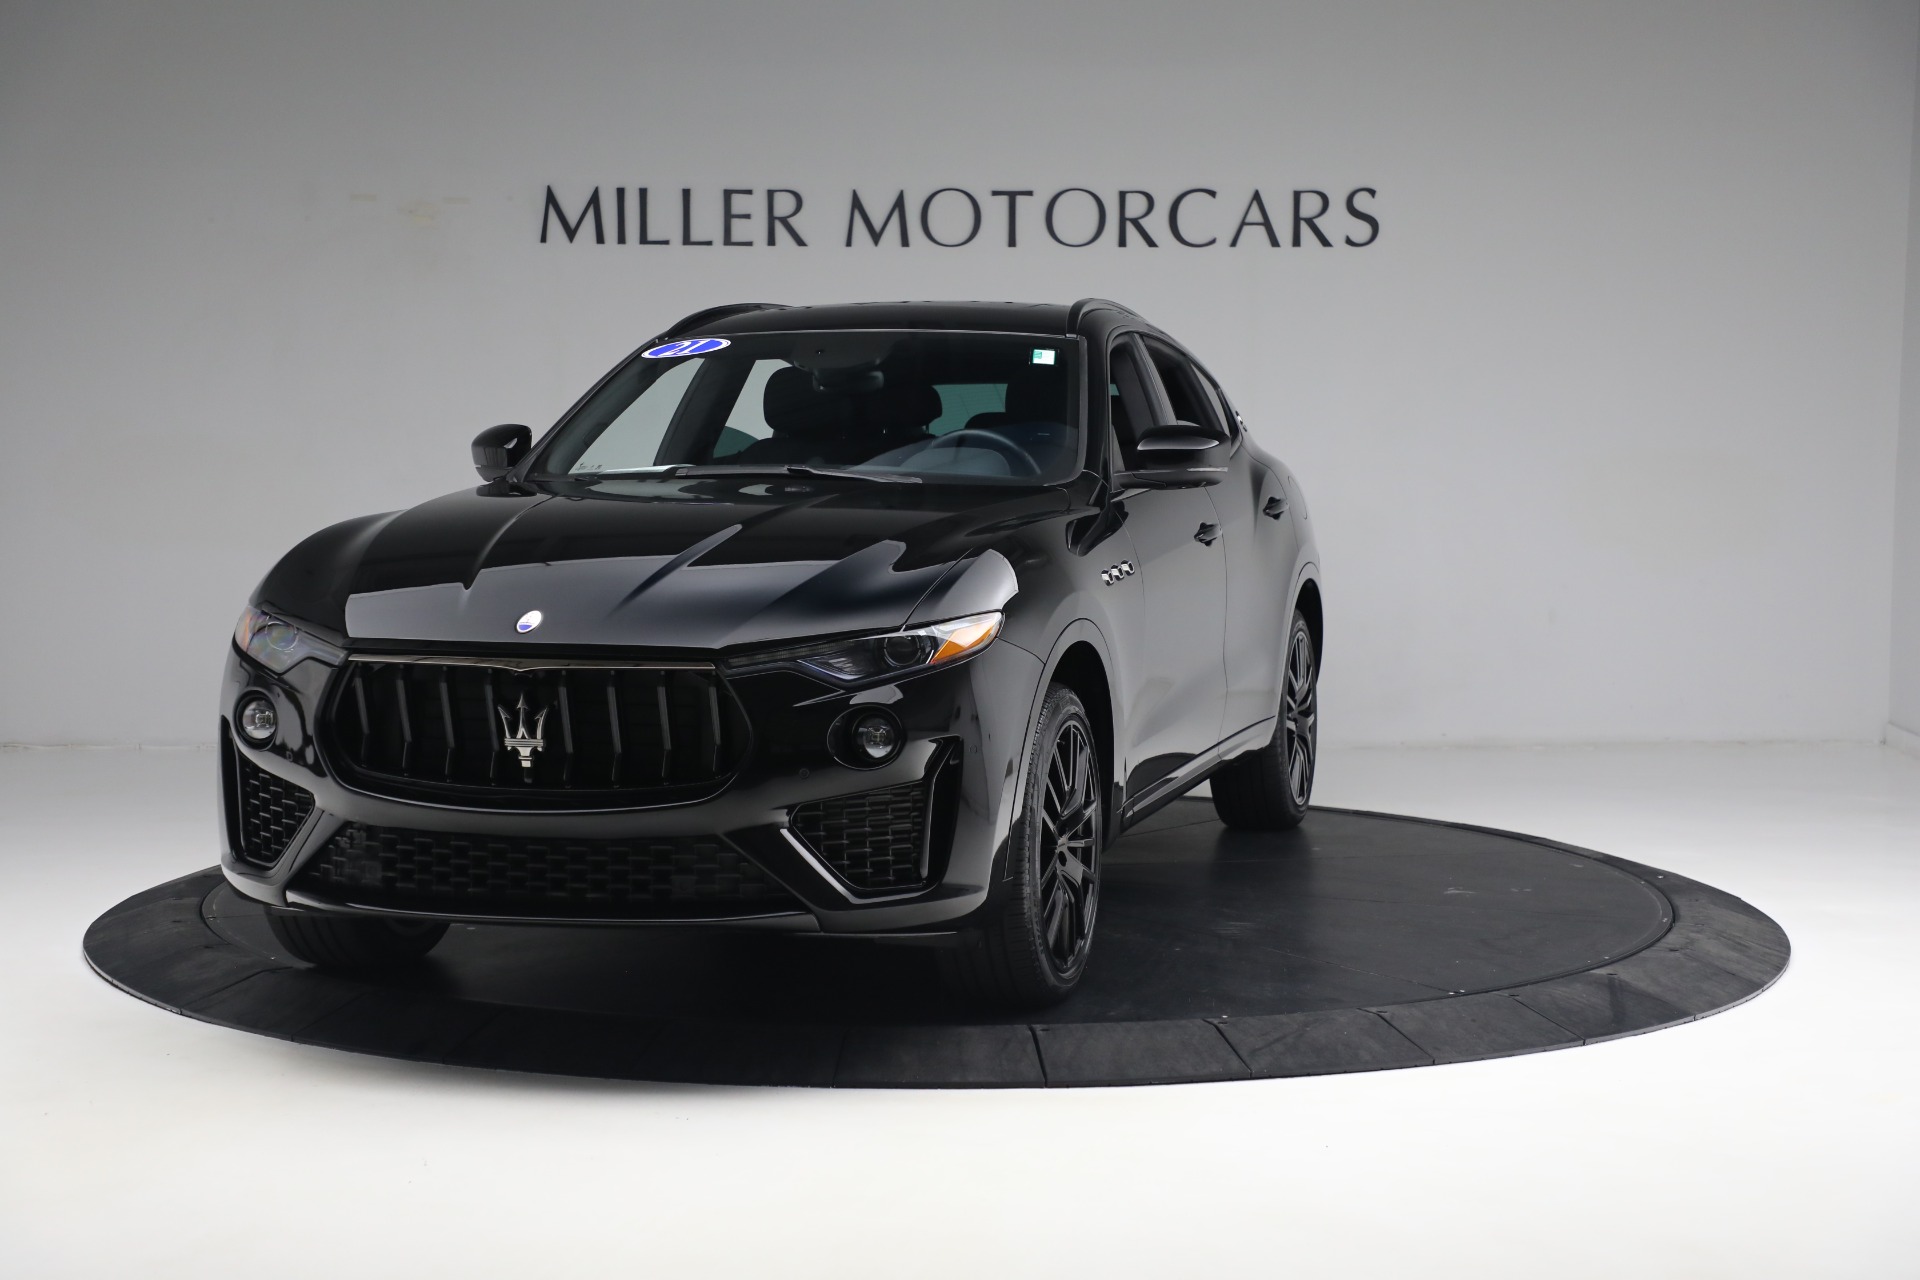 Used 2021 Maserati Levante for sale $57,900 at Rolls-Royce Motor Cars Greenwich in Greenwich CT 06830 1